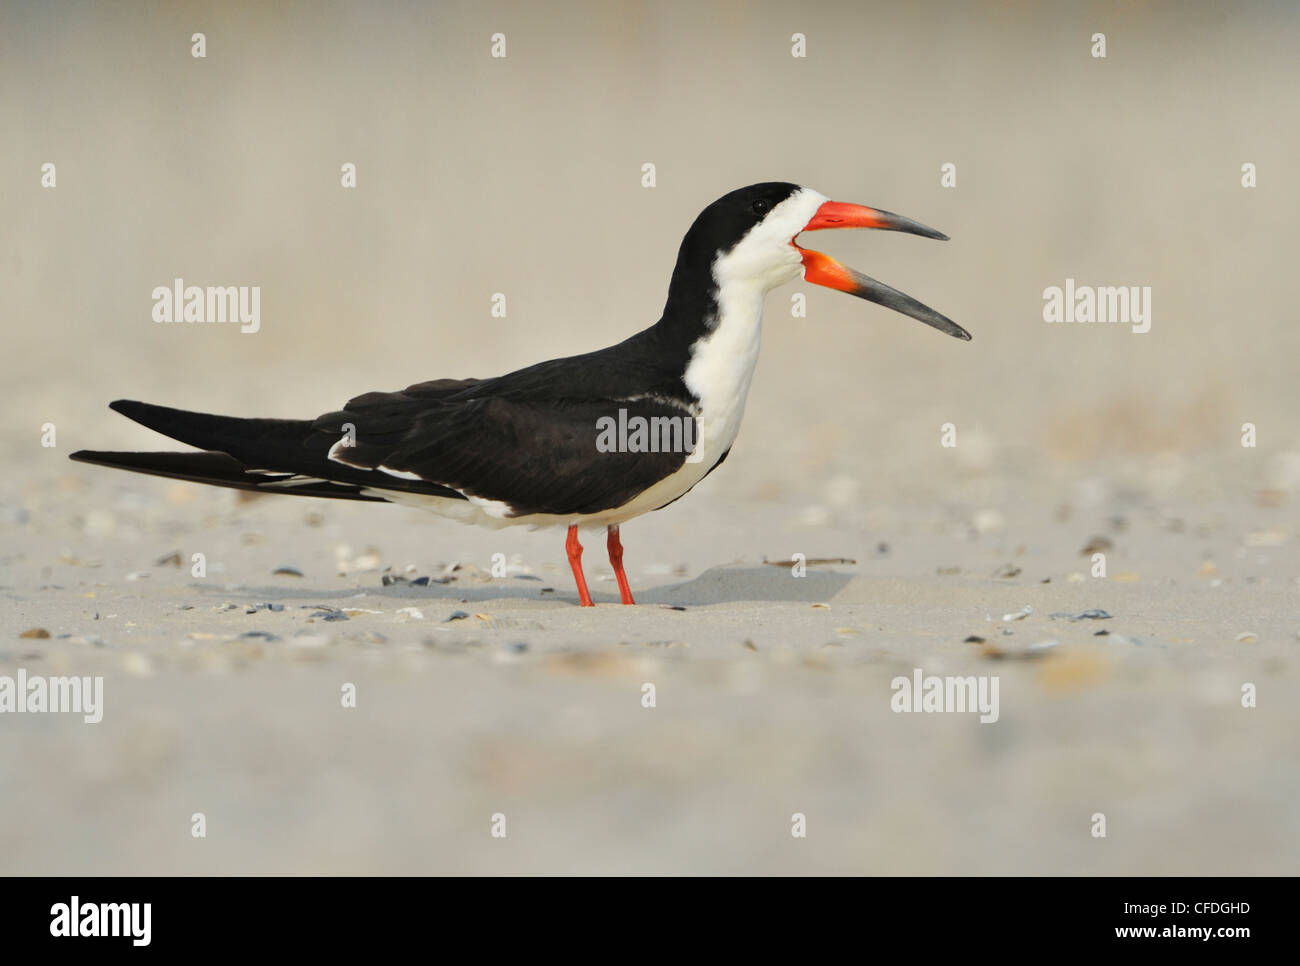 Black Skimmer (Rynchops niger) on beach at South Padre Island, Texas, United States of America Stock Photo